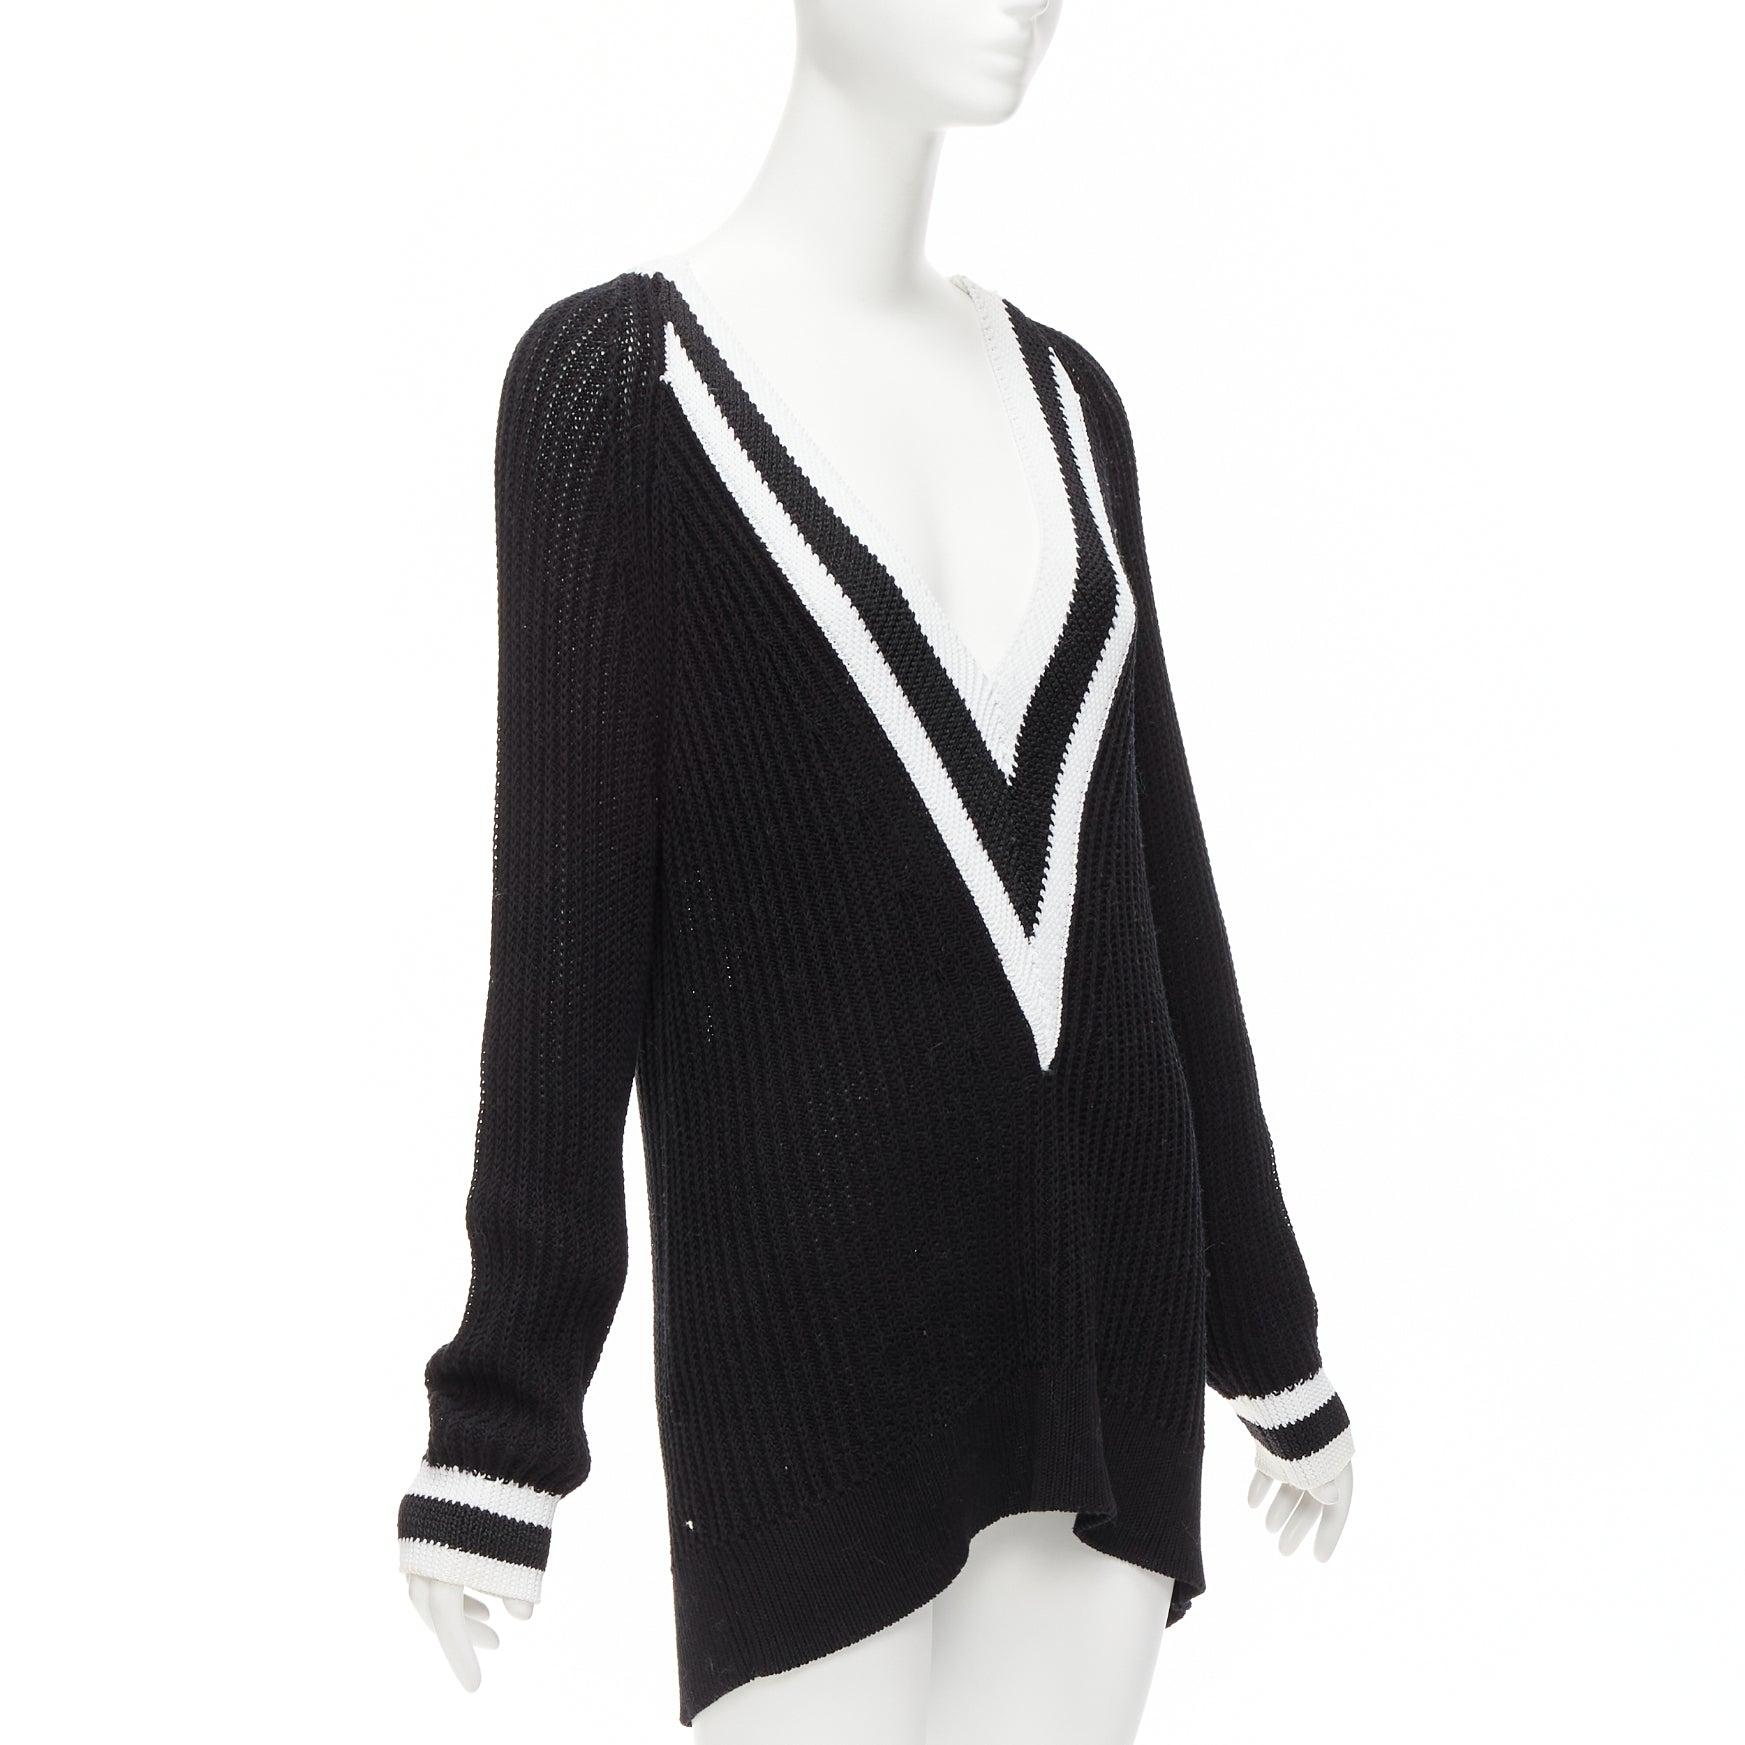 RAG & BONE black white cotton deep V raglan sleeve varsity sweater M
Reference: DYTG/A00036
Brand: rag & bone
Material: Cotton
Color: Black, White
Pattern: Striped
Closure: Slip On
Made in: China

CONDITION:
Condition: Excellent, this item was